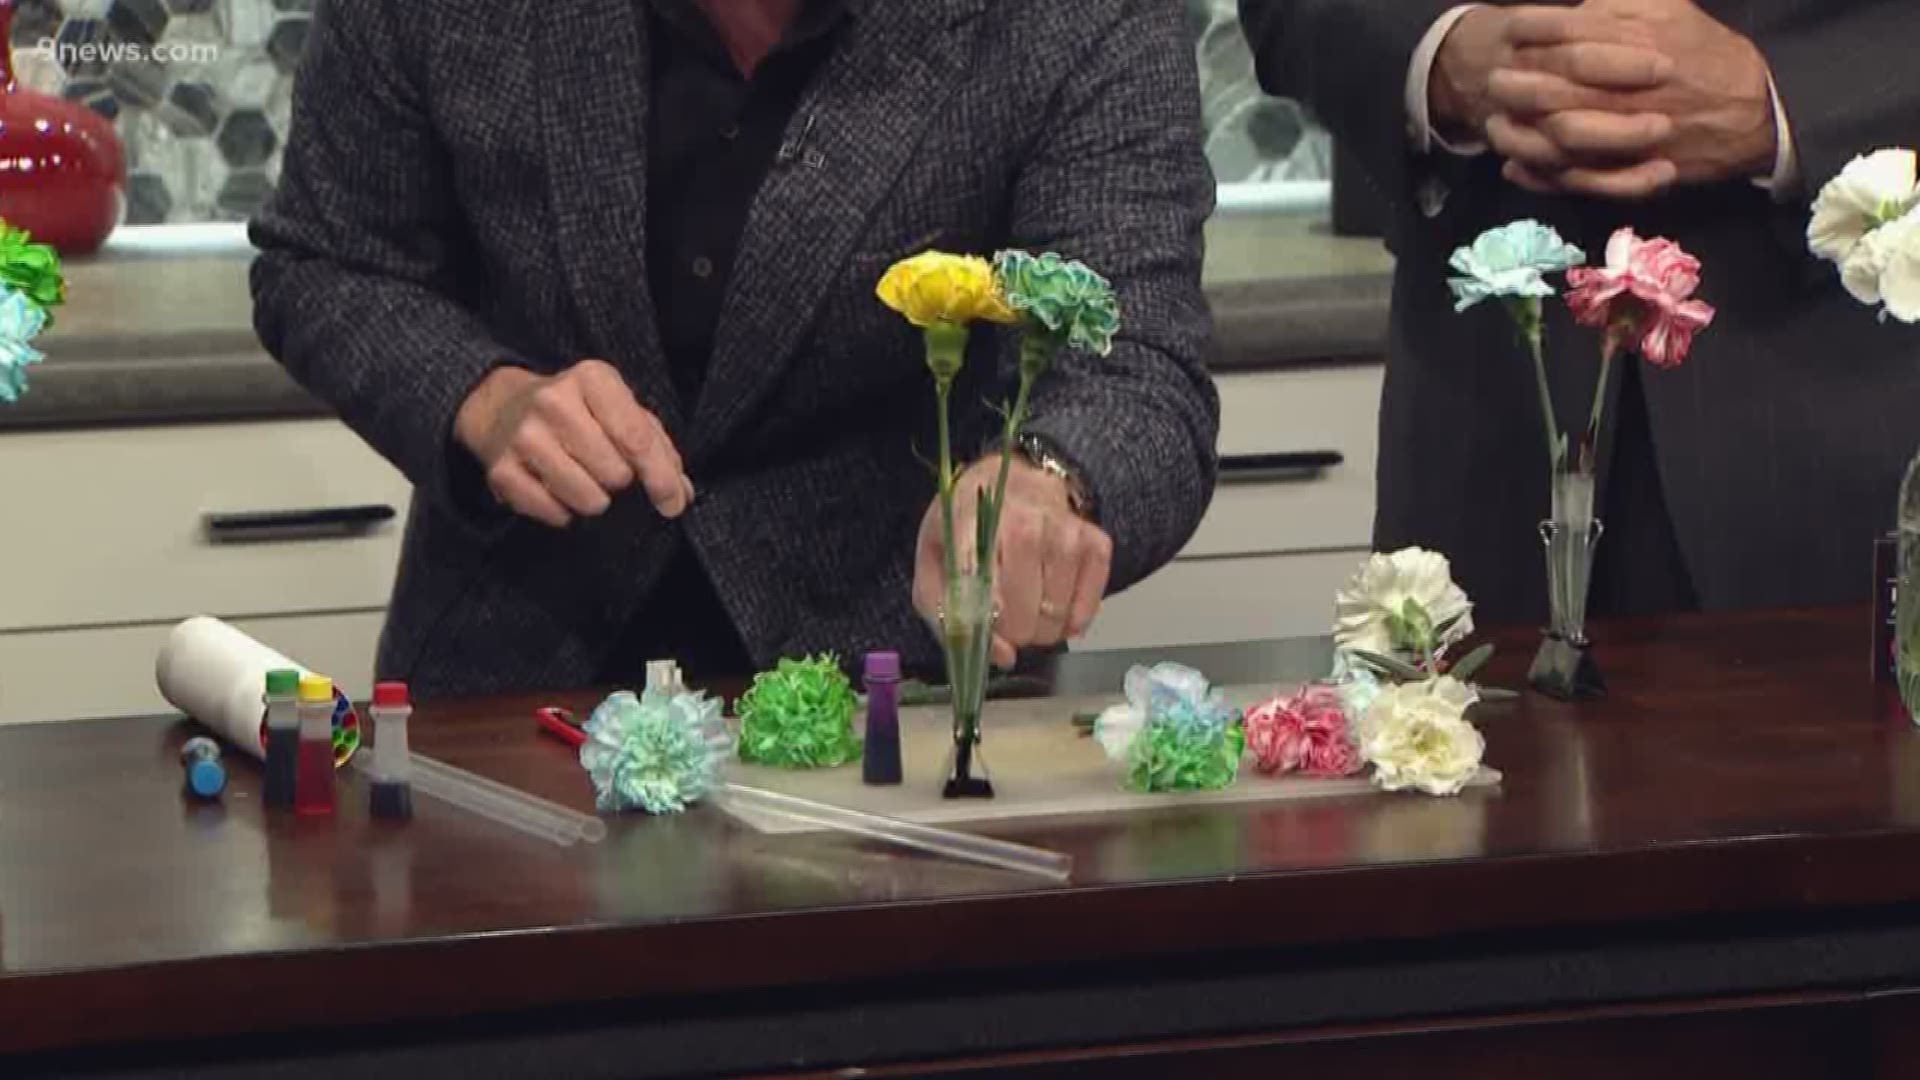 If you receive a beautiful bouquet of flowers on Valentine’s Day, what’s the best way to prolong the life of the flowers? Our science guy Steve Spangler explains.